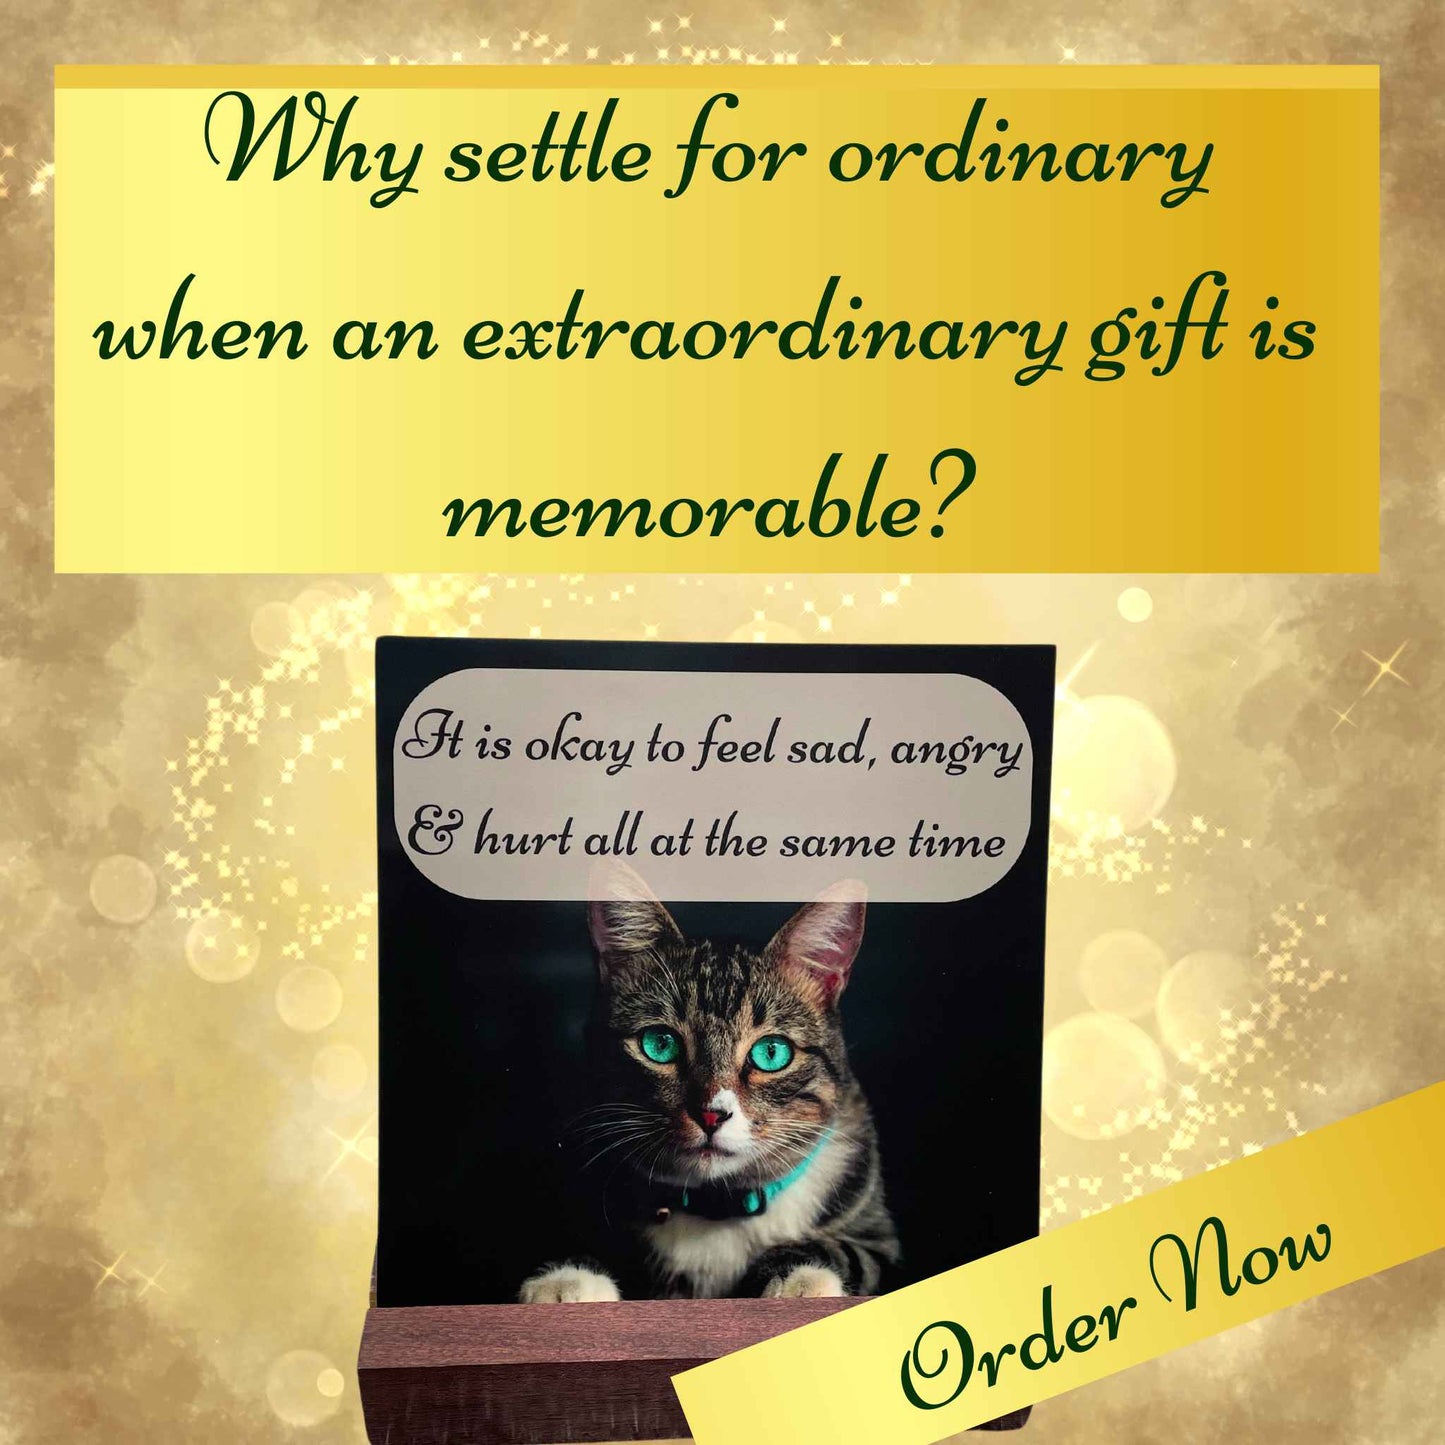 Comfort Card Gift Sets for the Loss of a Beloved Cat